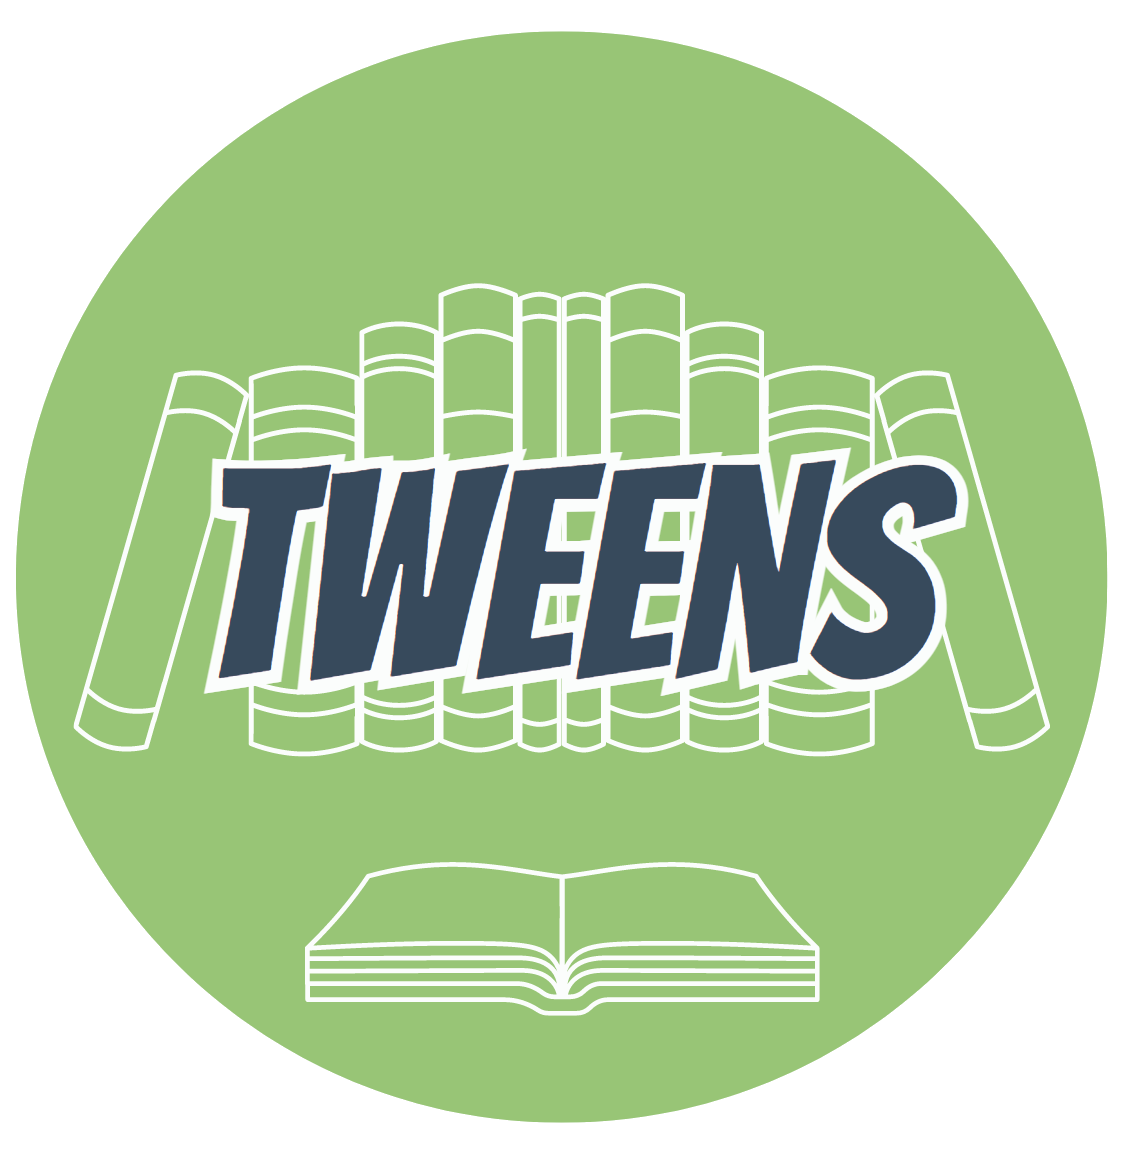 A green circle with white books in the background. The word "tweens" in written over the books.